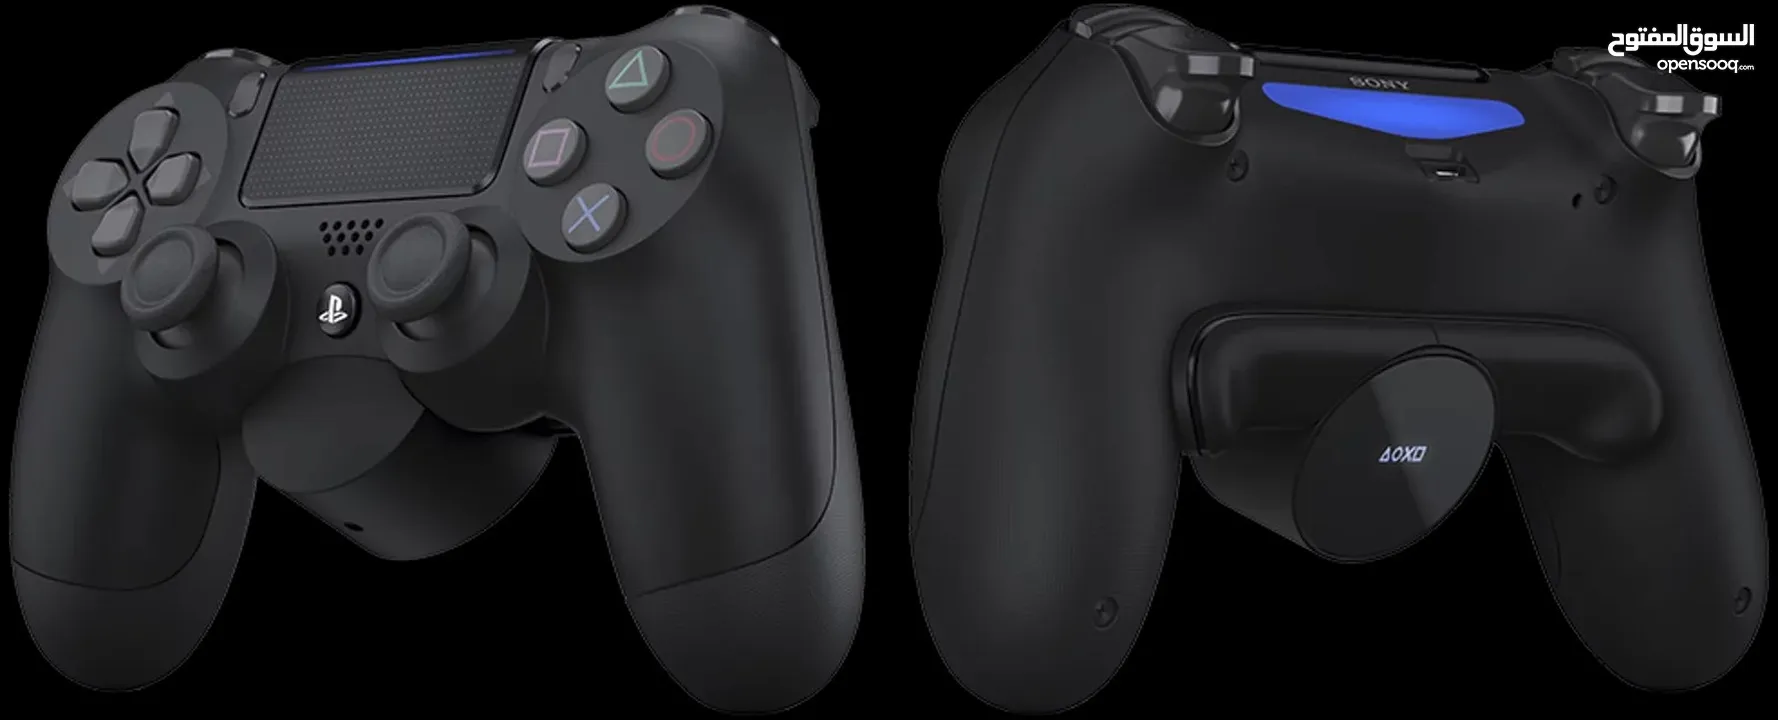 Back button Sony ps4 DualShock attachment